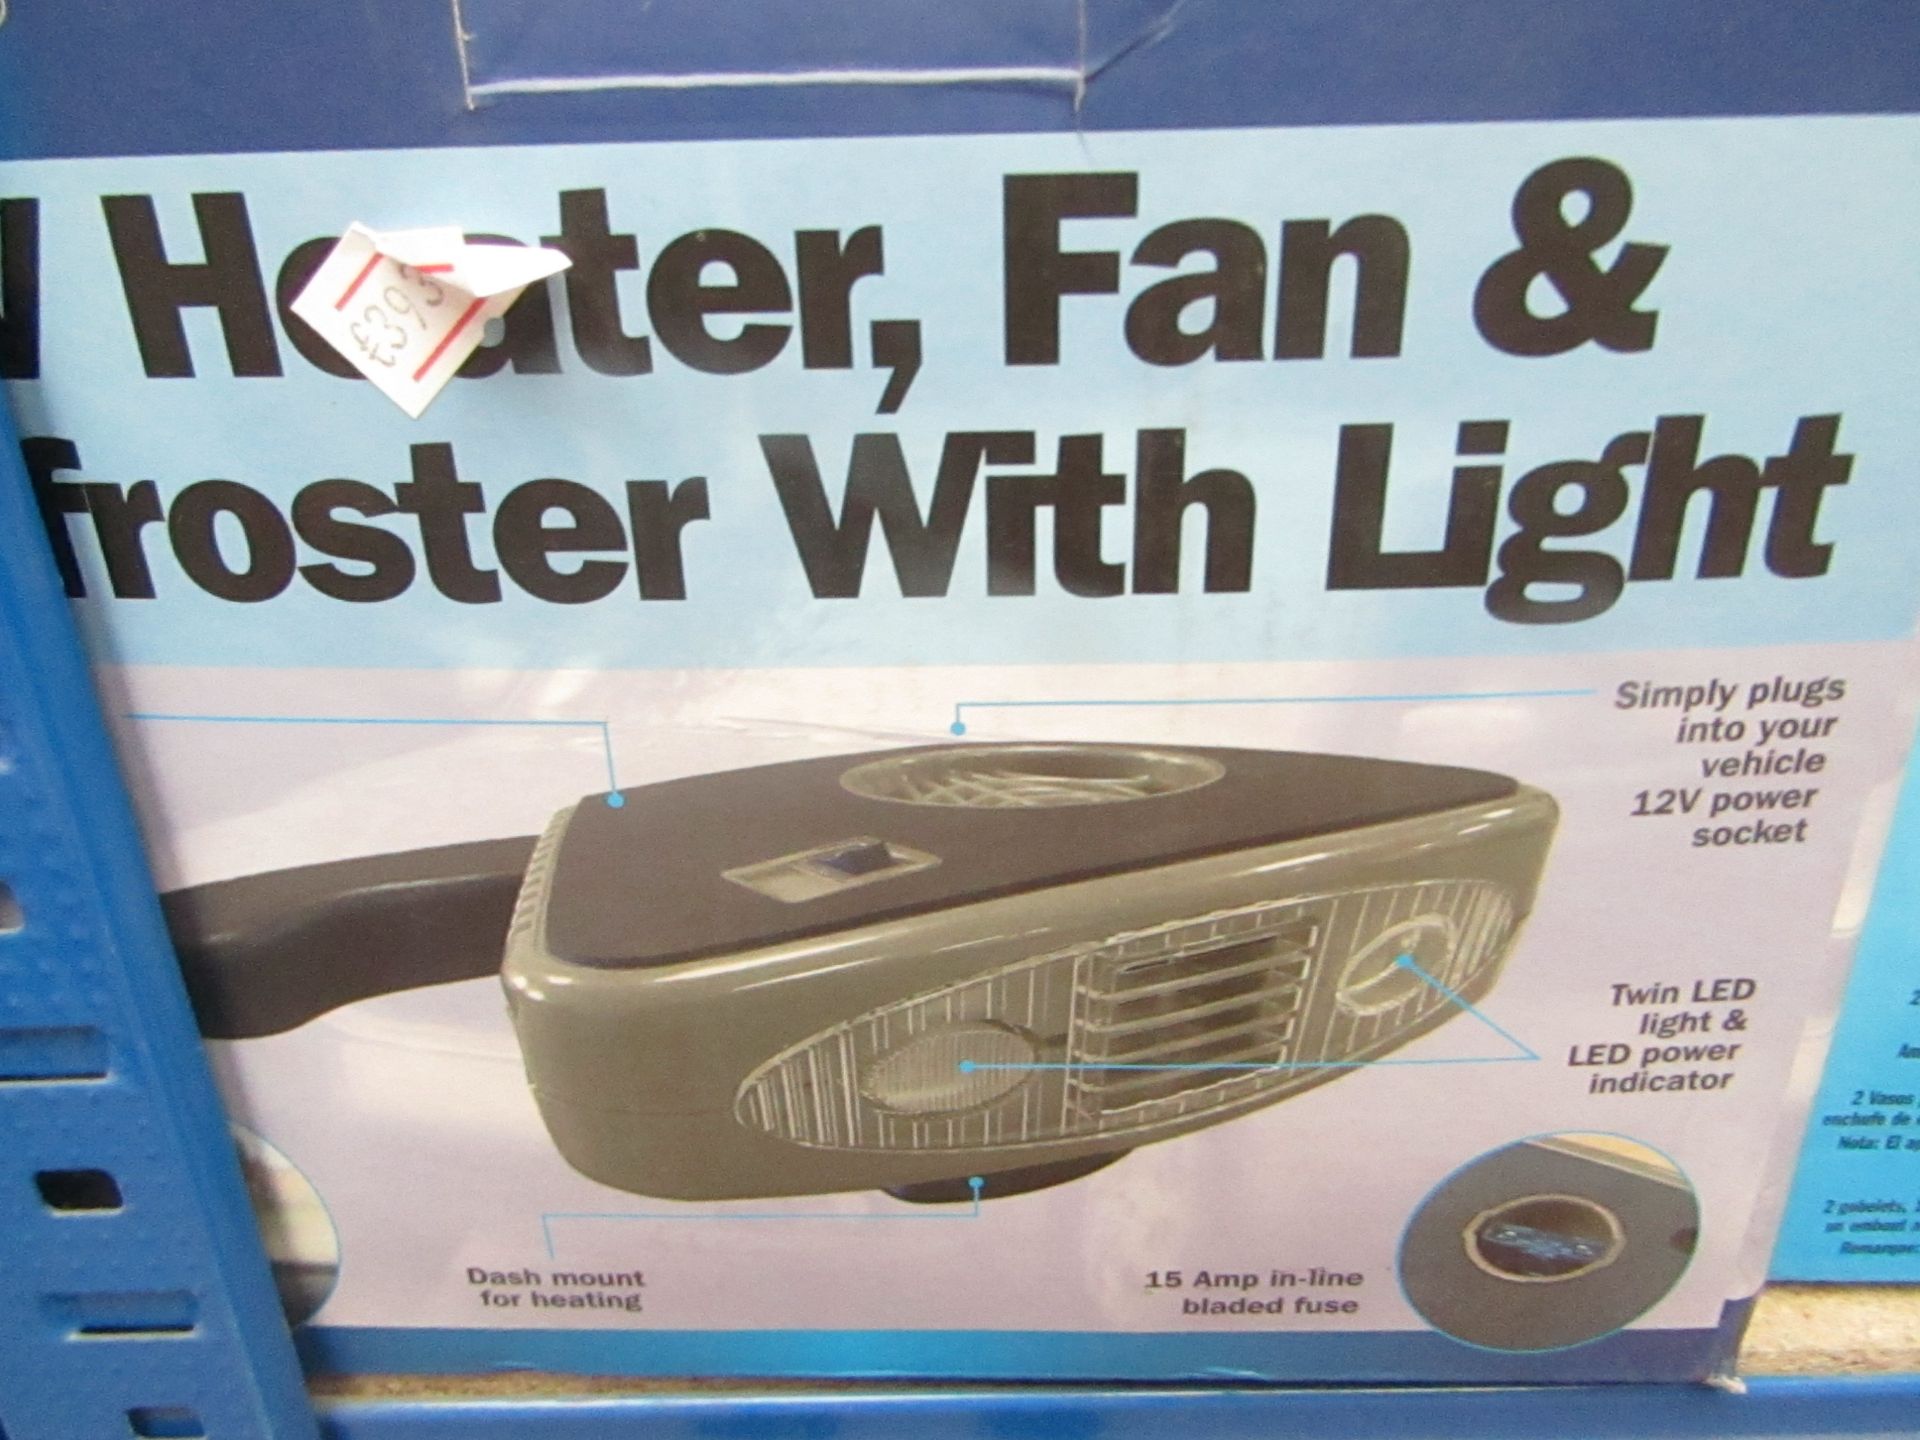 2x Streetwize 12v heater, fan and defroster with light, both tested working and boxed.